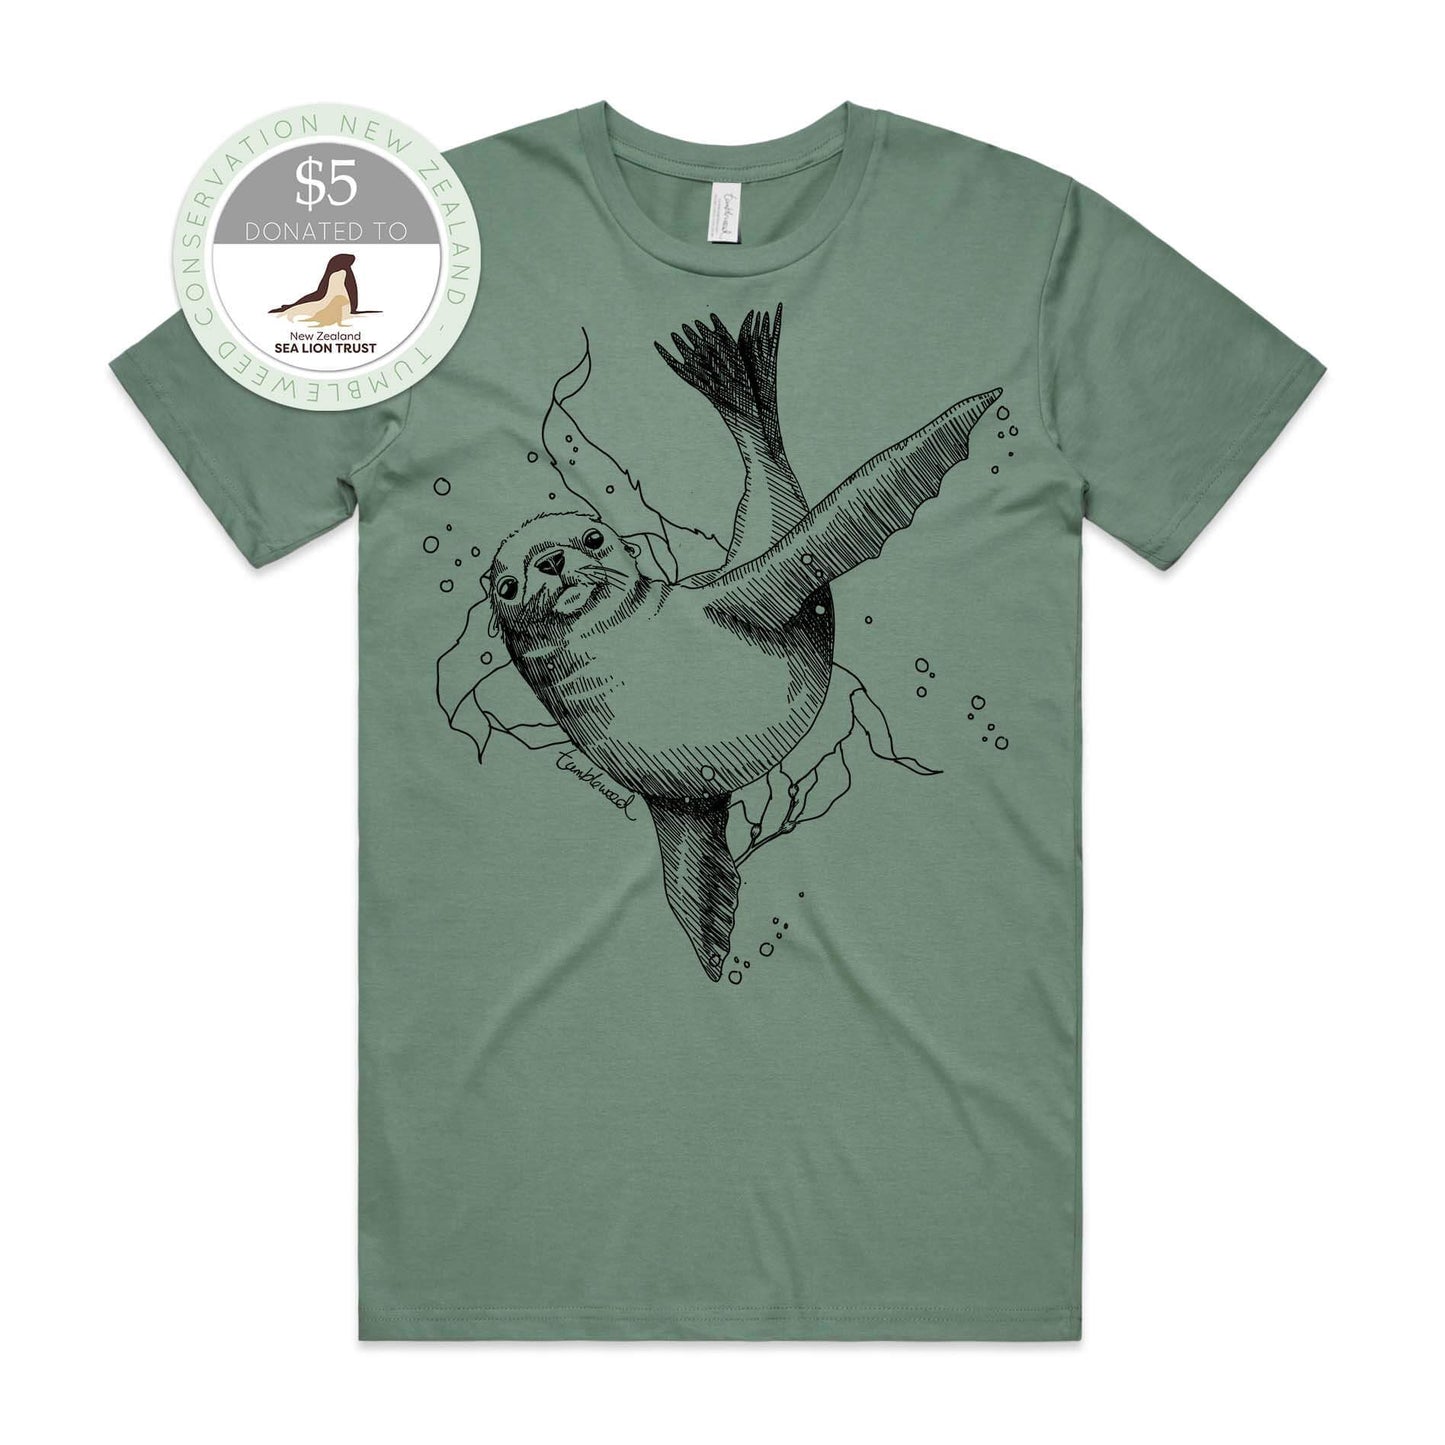 Grey, male t-shirt featuring a screen printed New Zealand sea lion design.